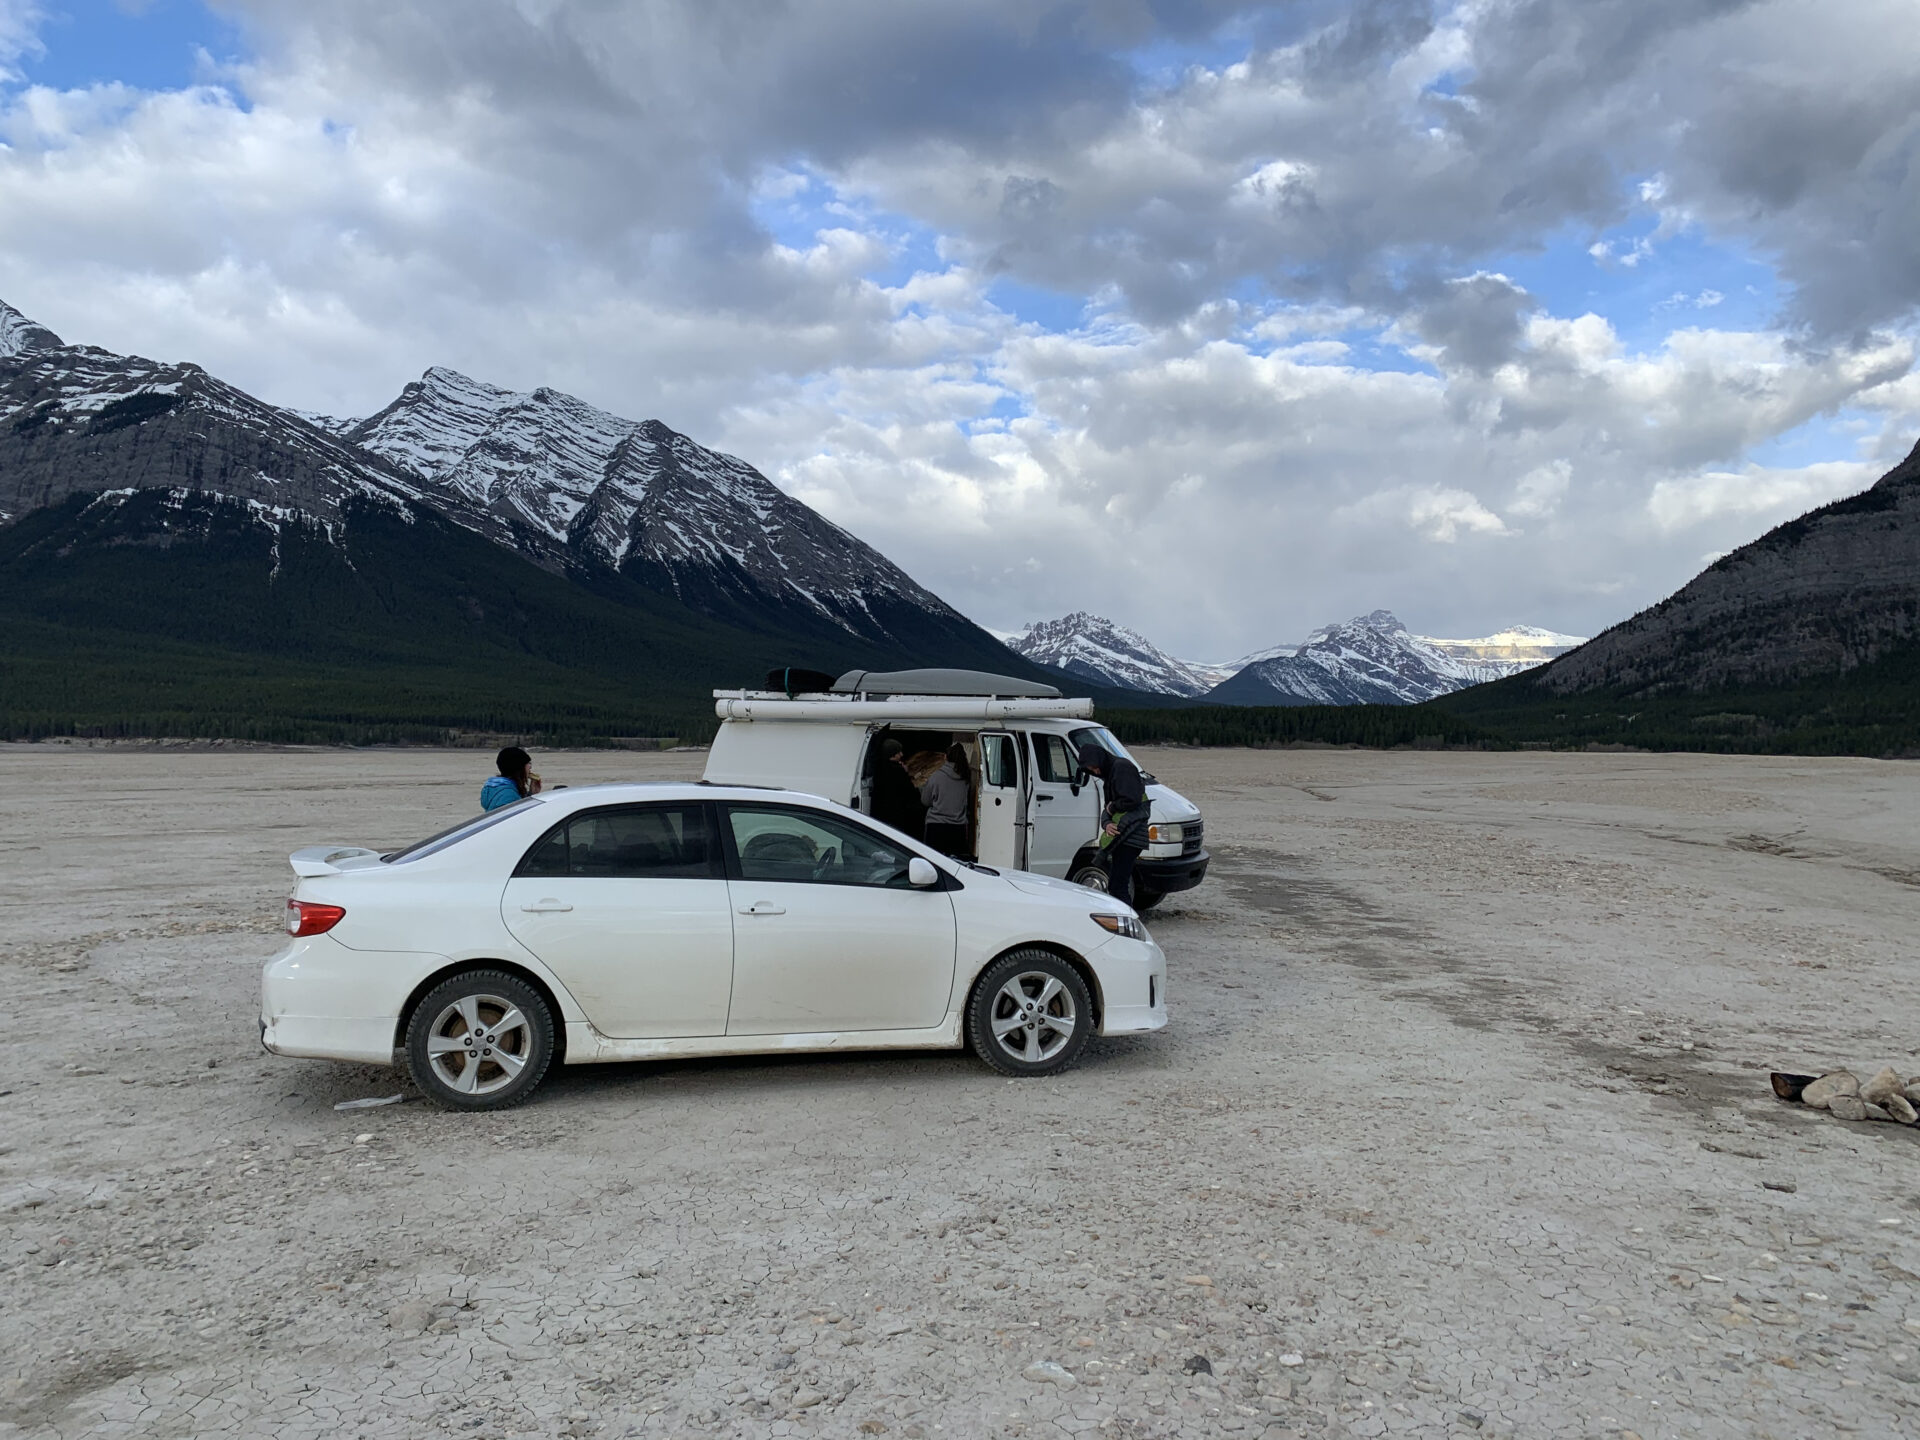 Camping at Abraham Lake, just off the Icefields Parkway